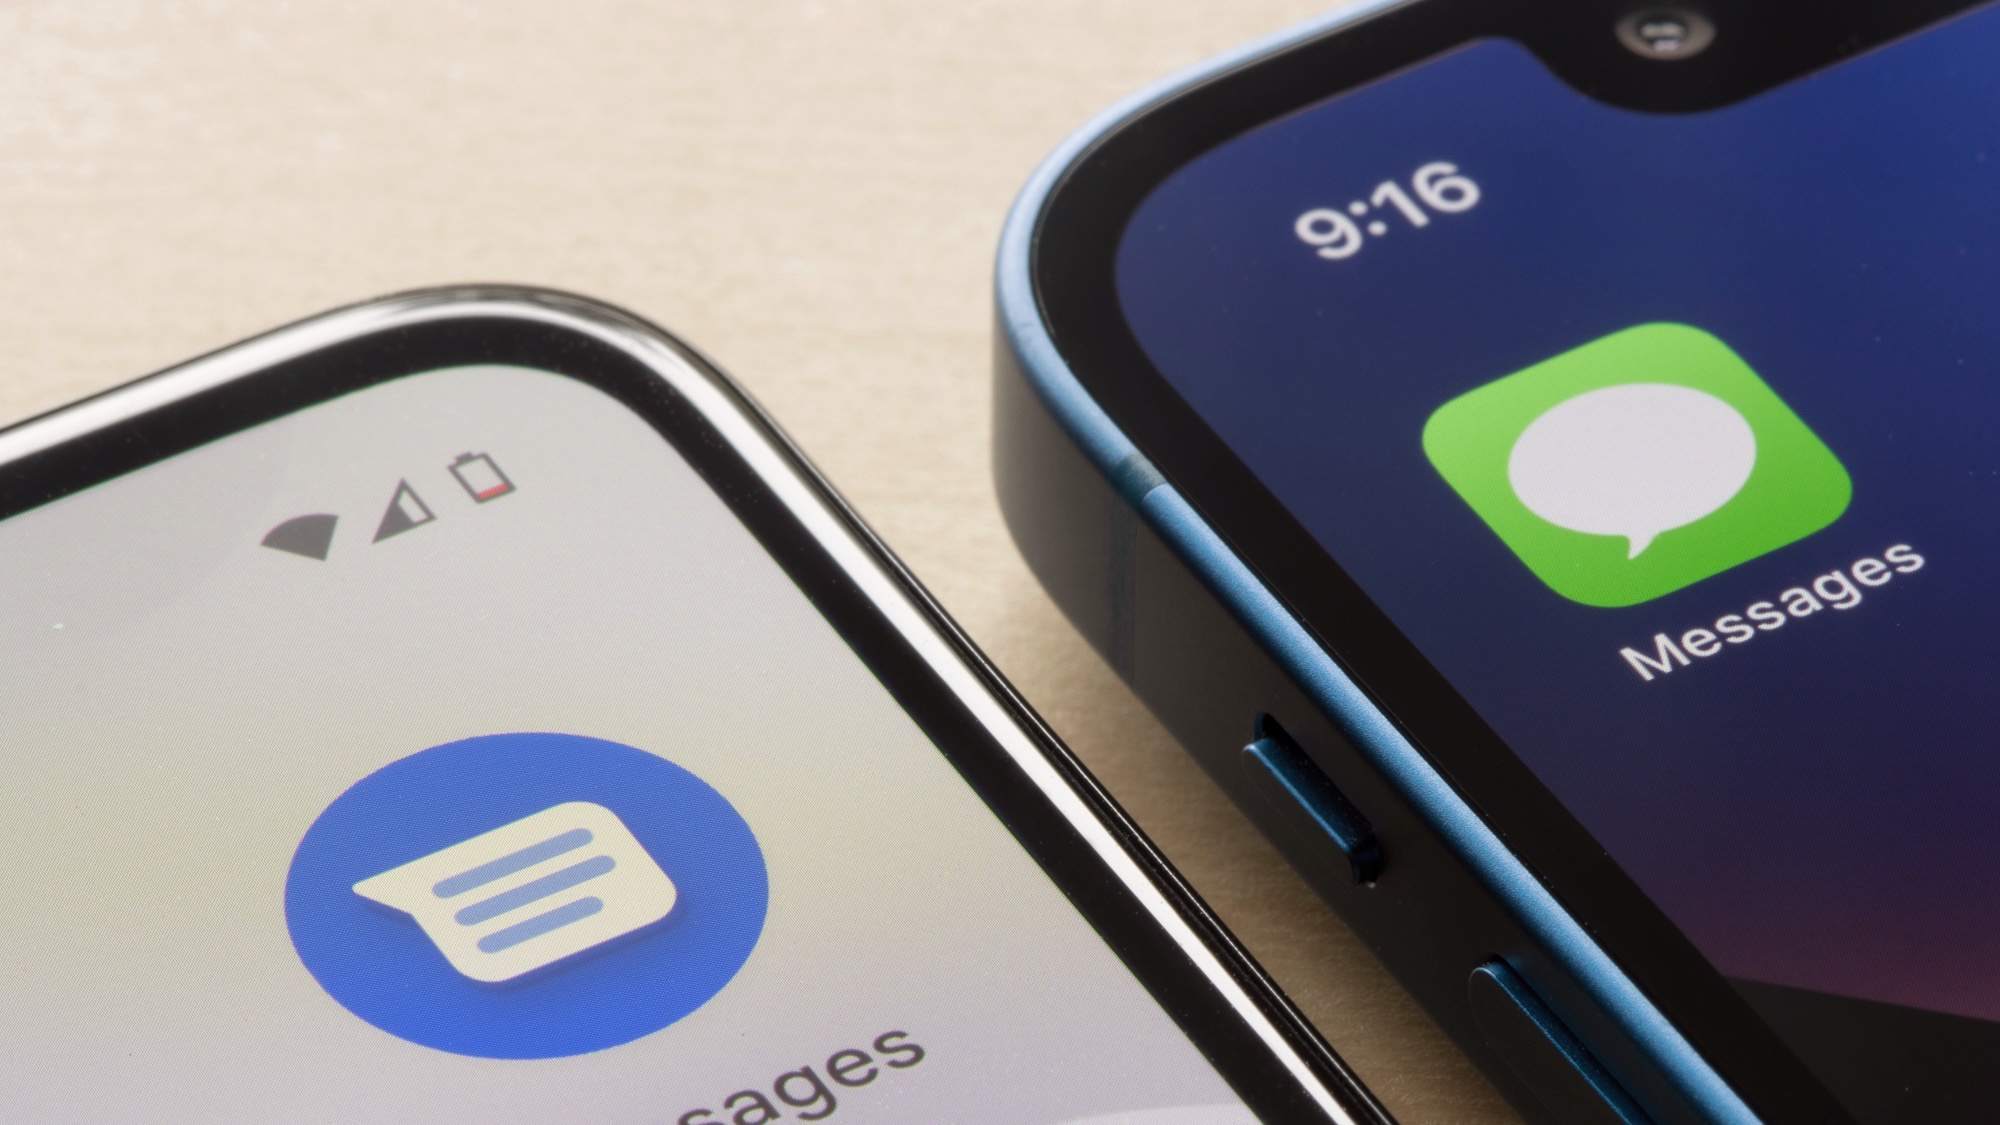 Google Messages on Android phone next to Messages app on iPhone